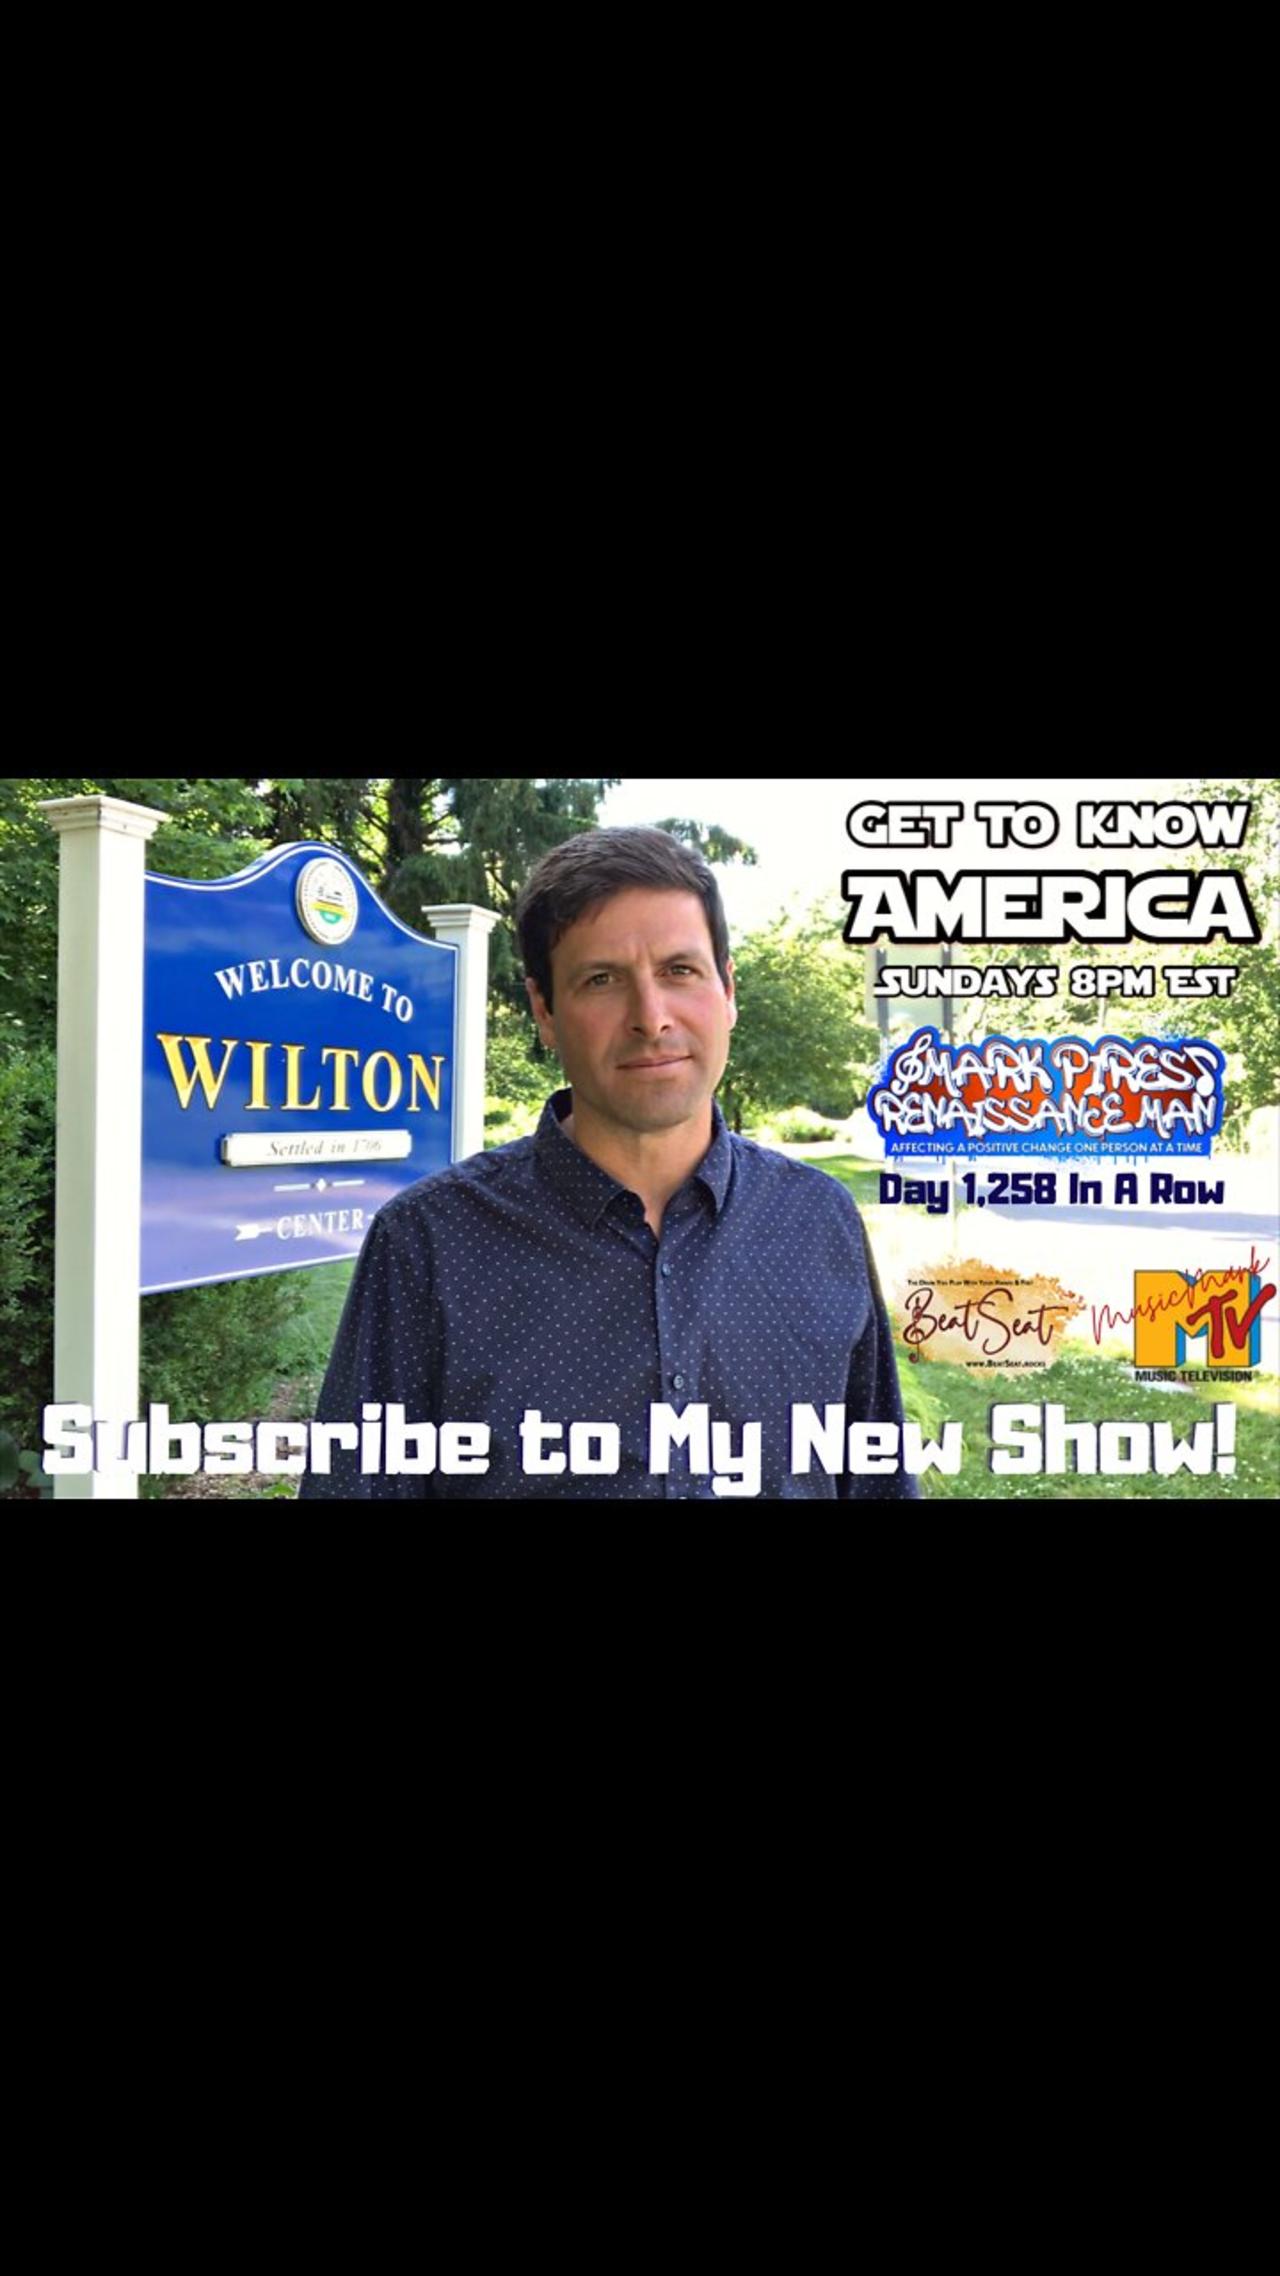 New Episode of Get To Know America Tomorrow 8pm EST On The New Channel